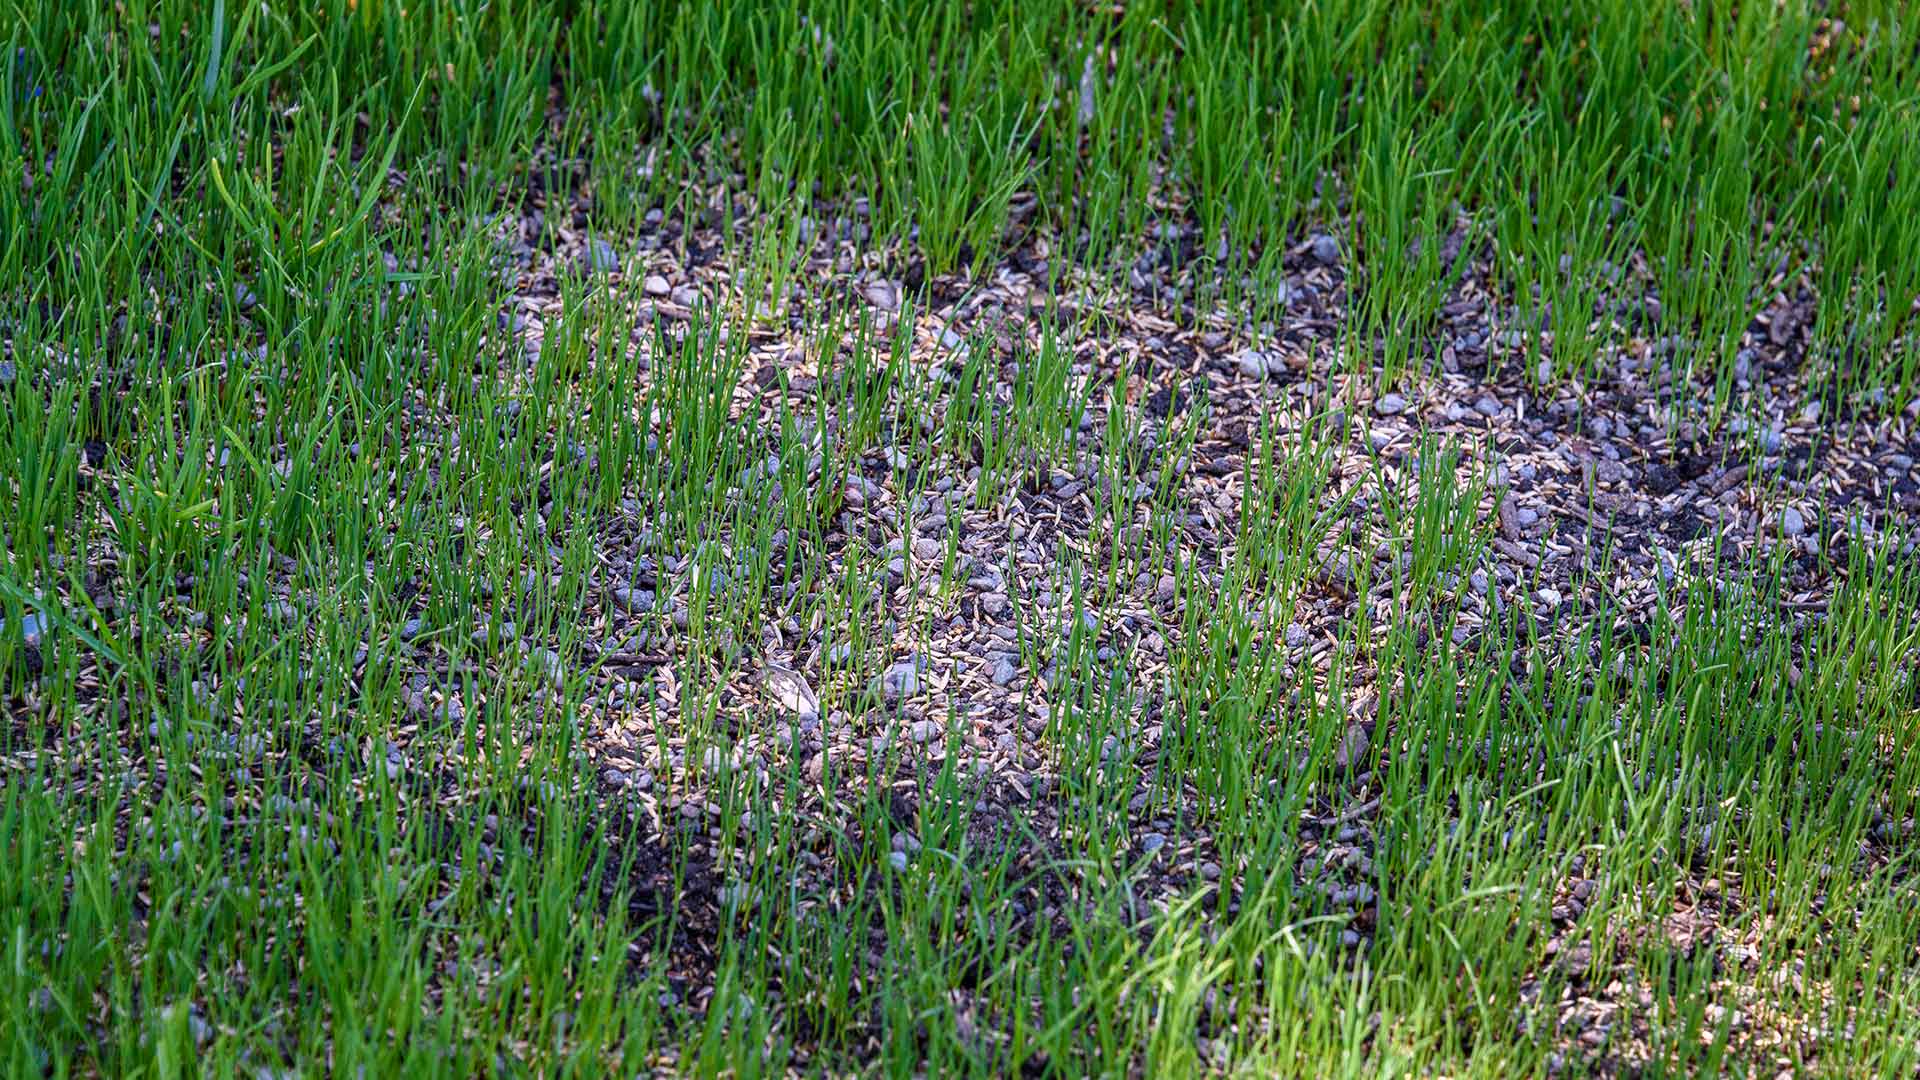 Lawn with seeds spread throughout in Brentwood, TN.